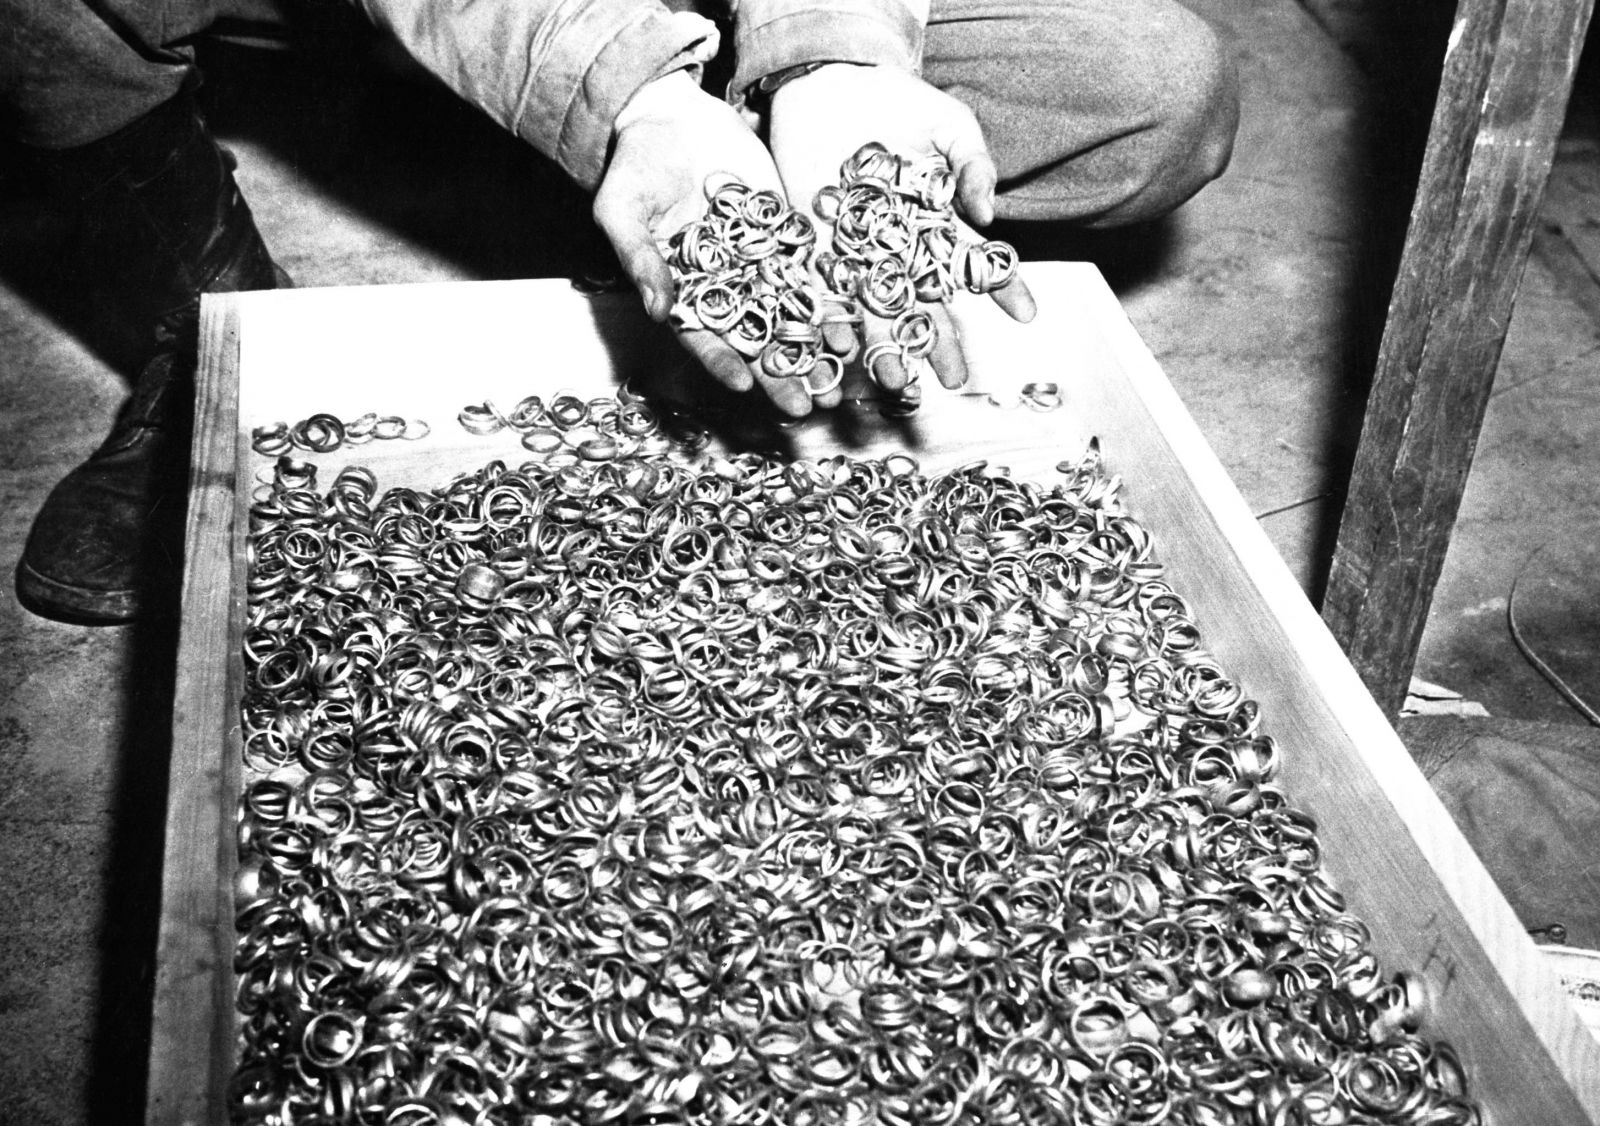 Wedding Rings stolen From inmates at Concentration Camp "Buchenwald," May 5, 1945